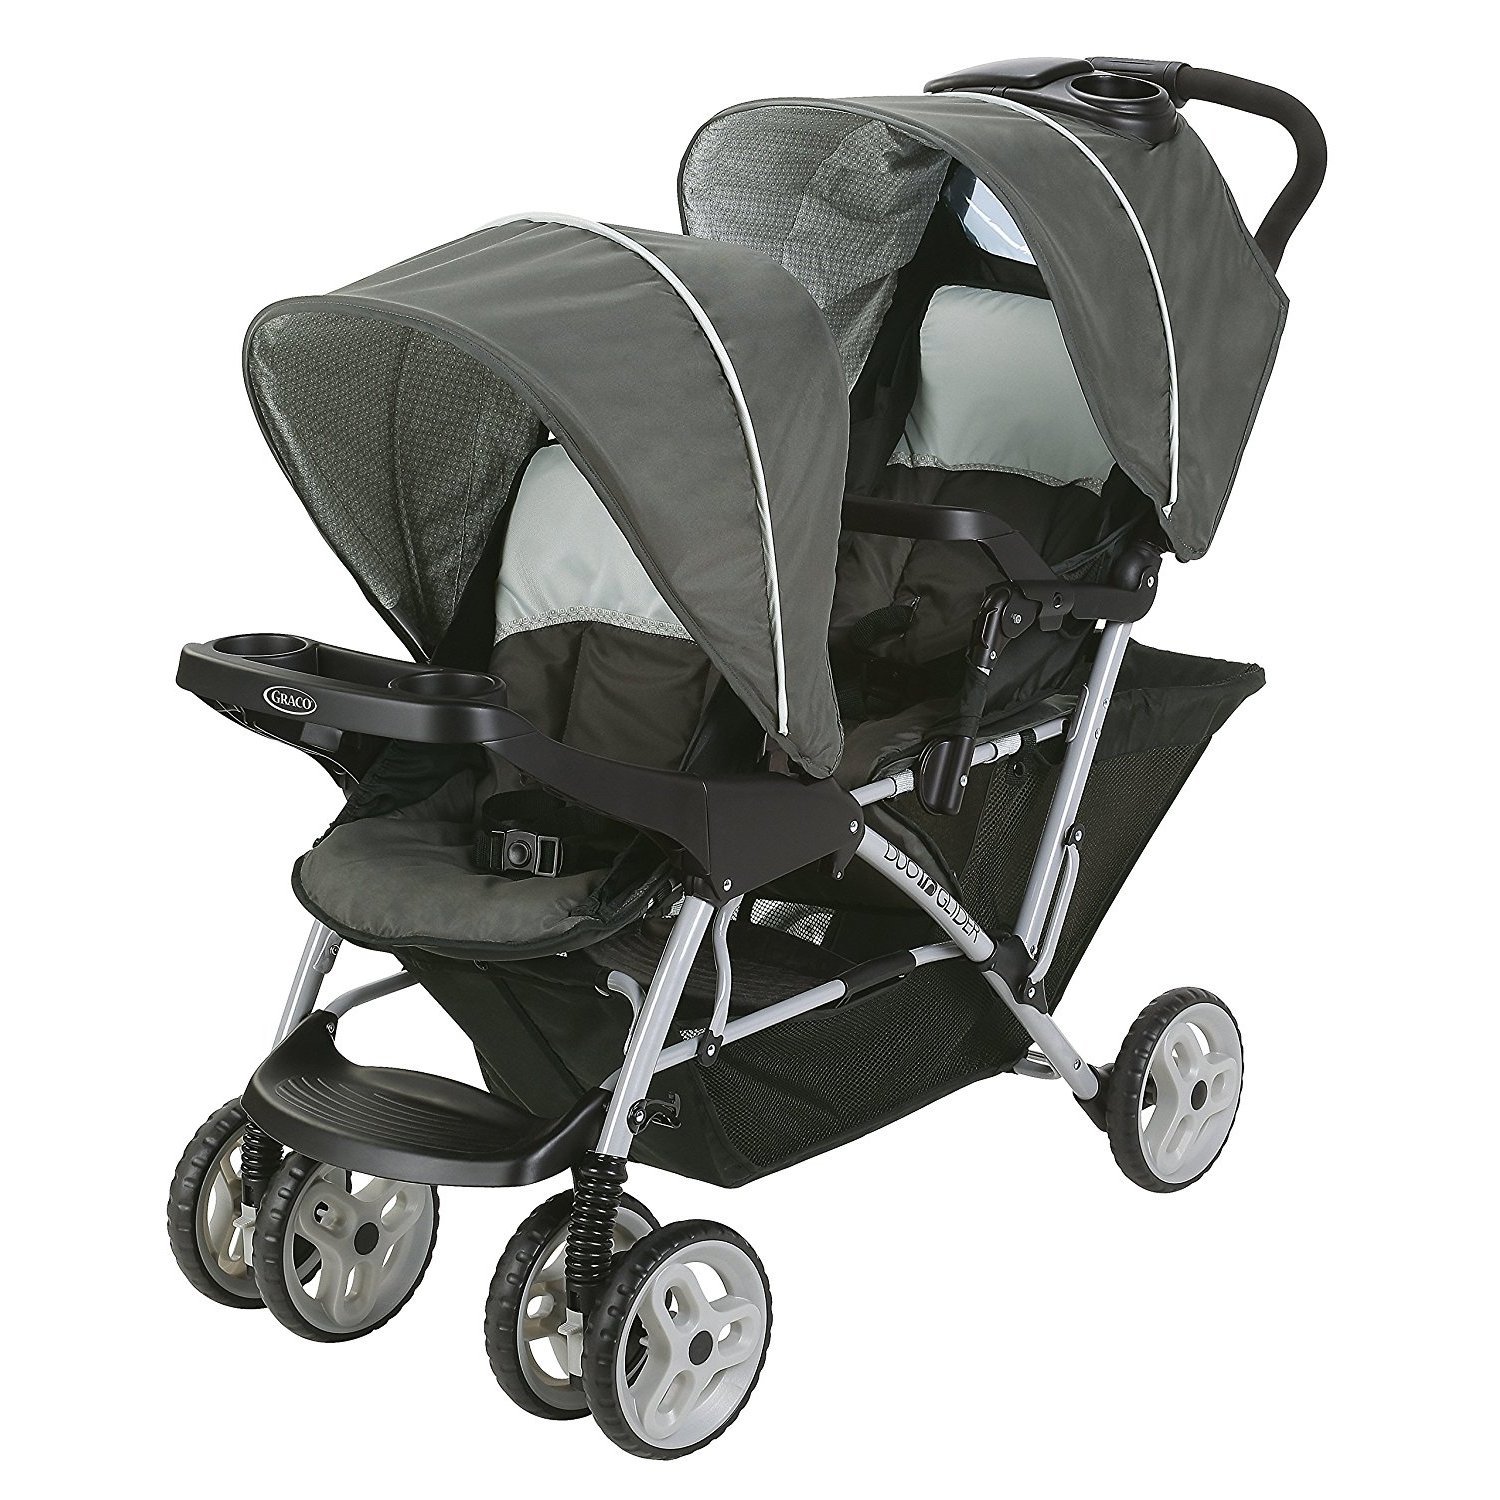 Graco DuoGlider Click Connect Double Stroller, Glacier, 27.37 lbs - image 1 of 7